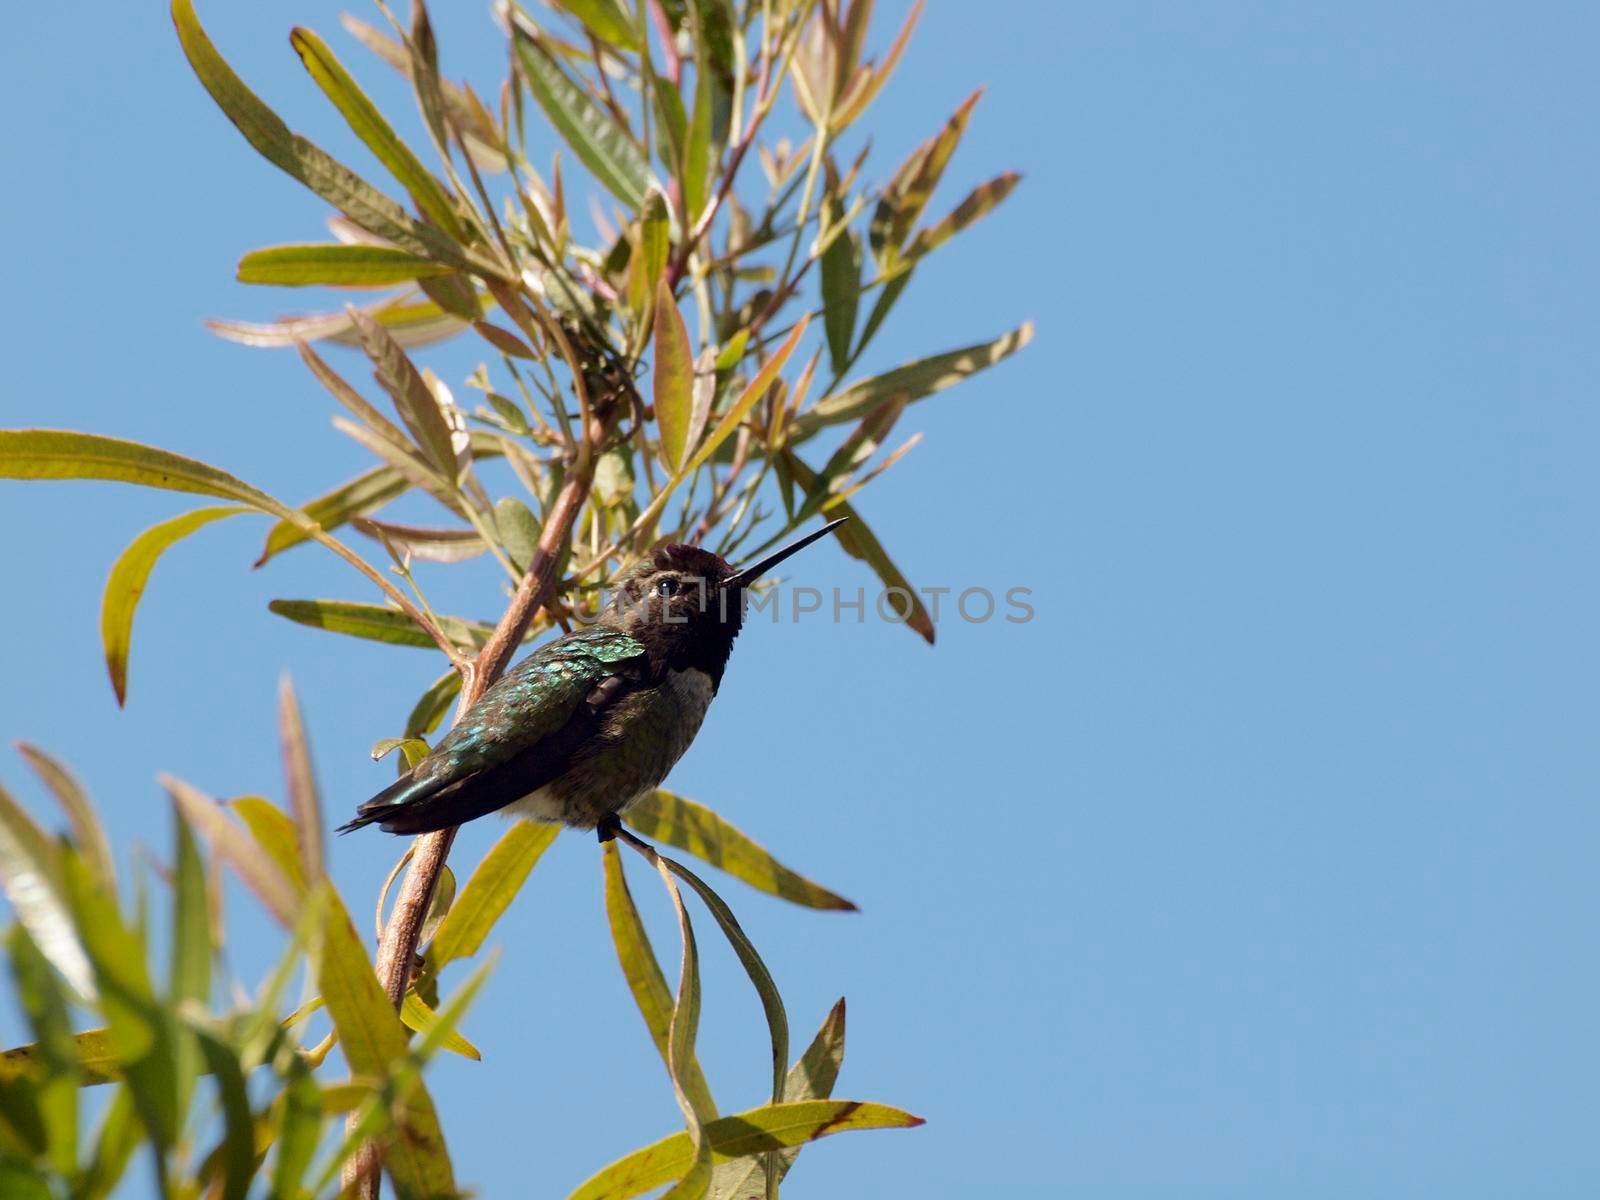 Small Humming Bird rests on Tree Branch with Blue sky.